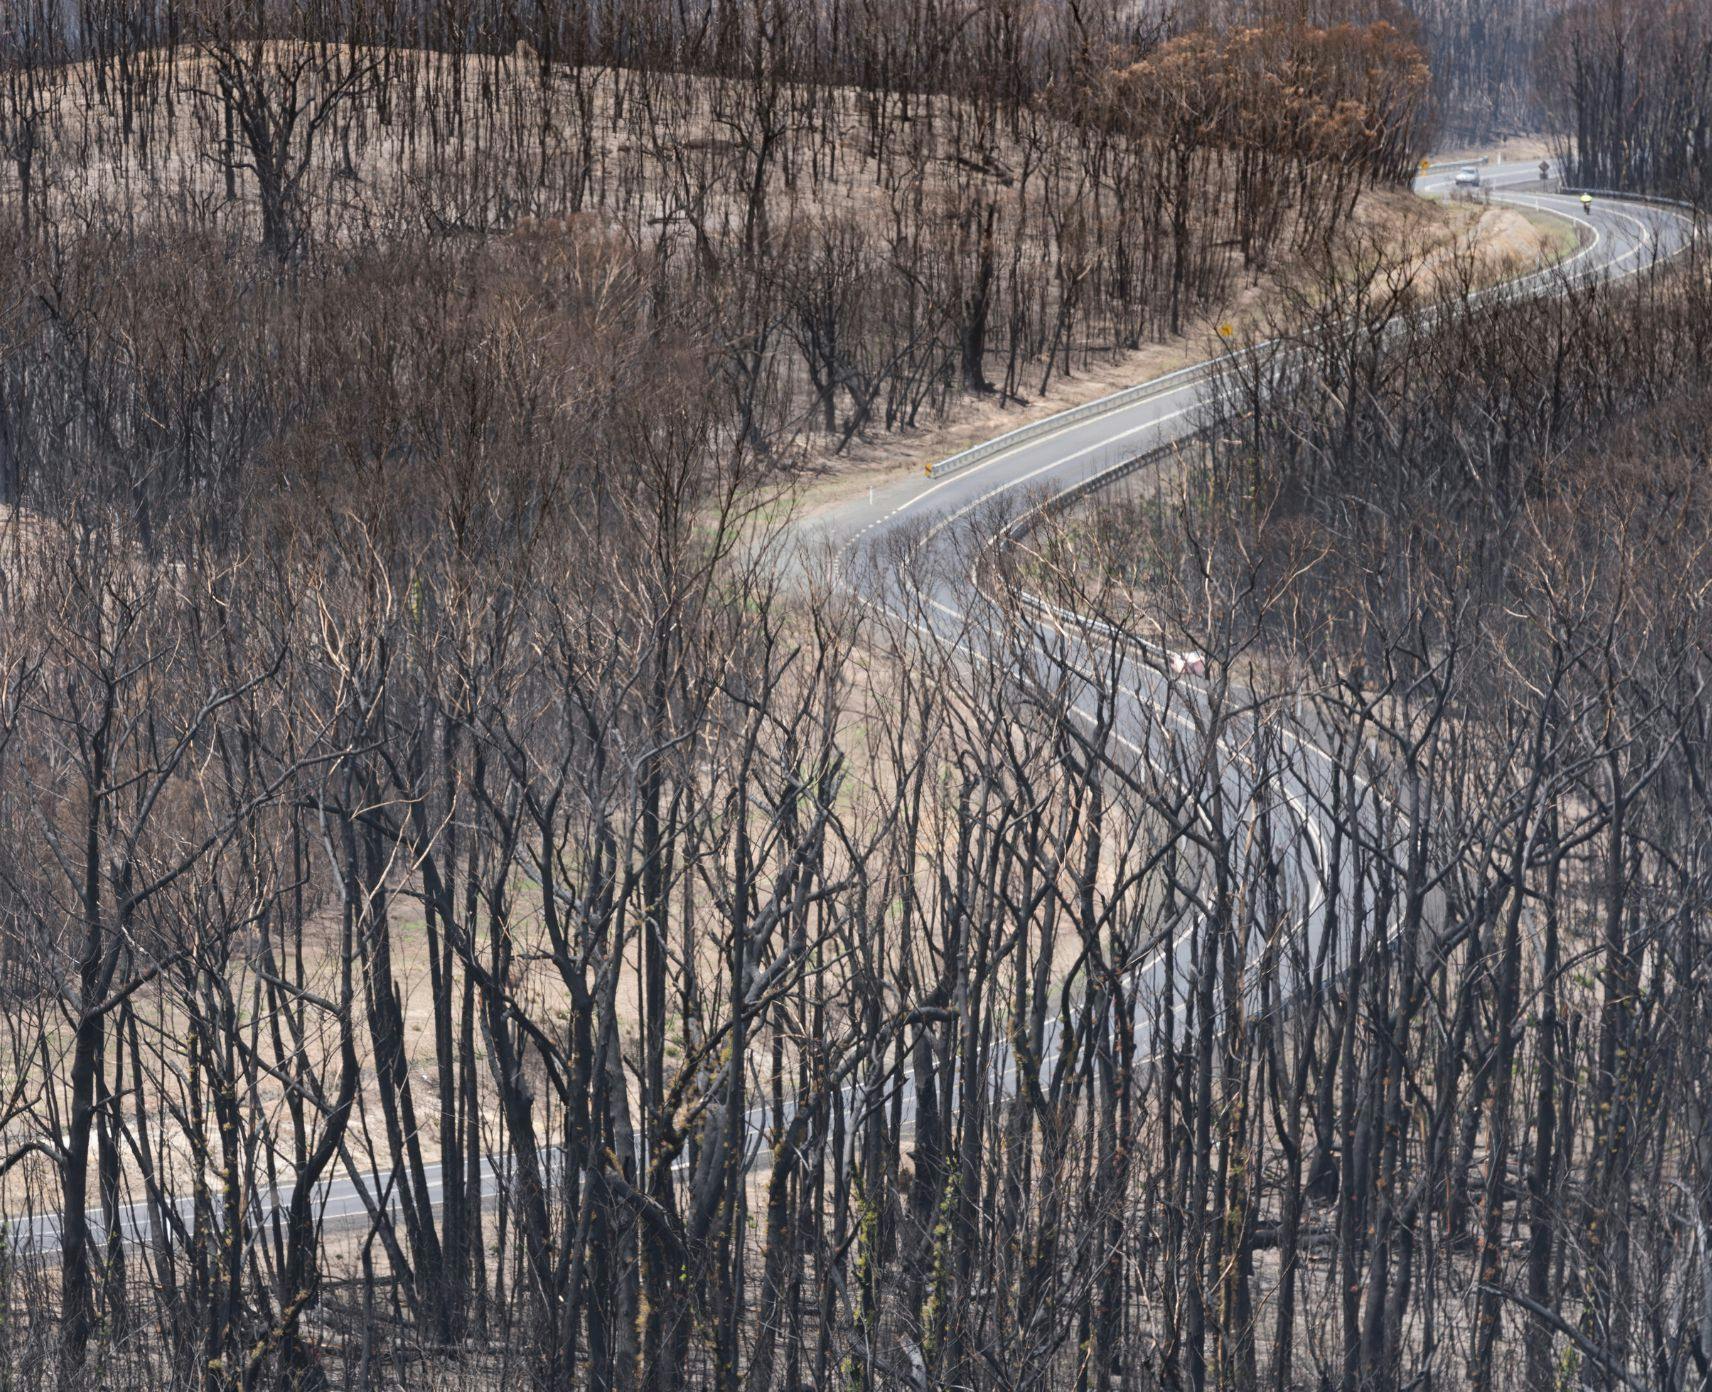 Black road snakes through burnt forest. Small hills are covered with black tree trucks.